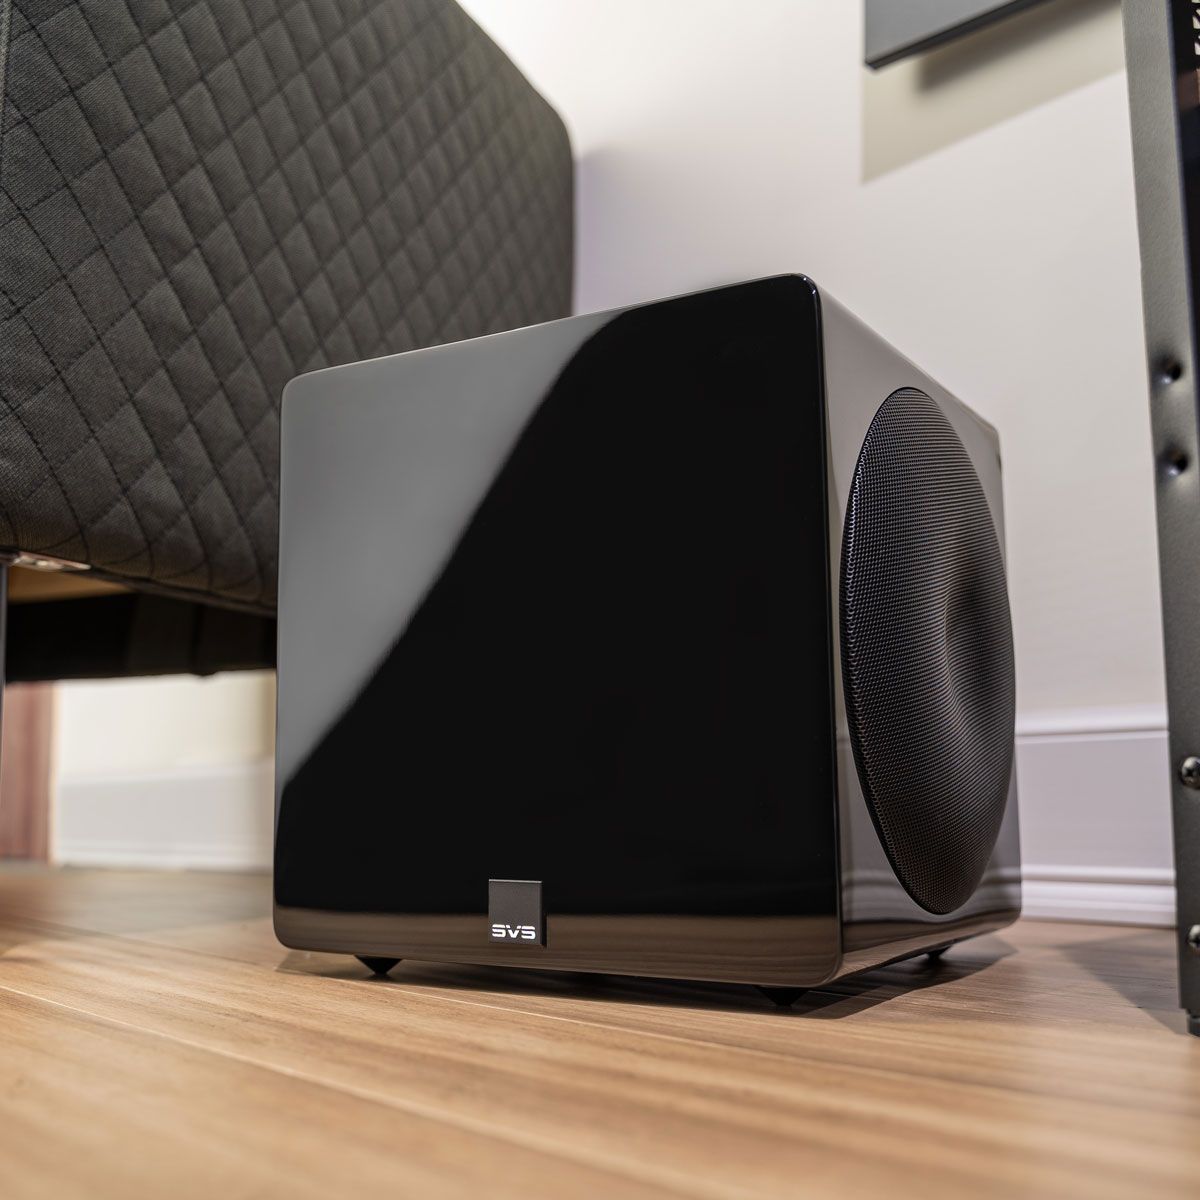 SVS 3000 Micro Subwoofer, black, in a room next to ottoman